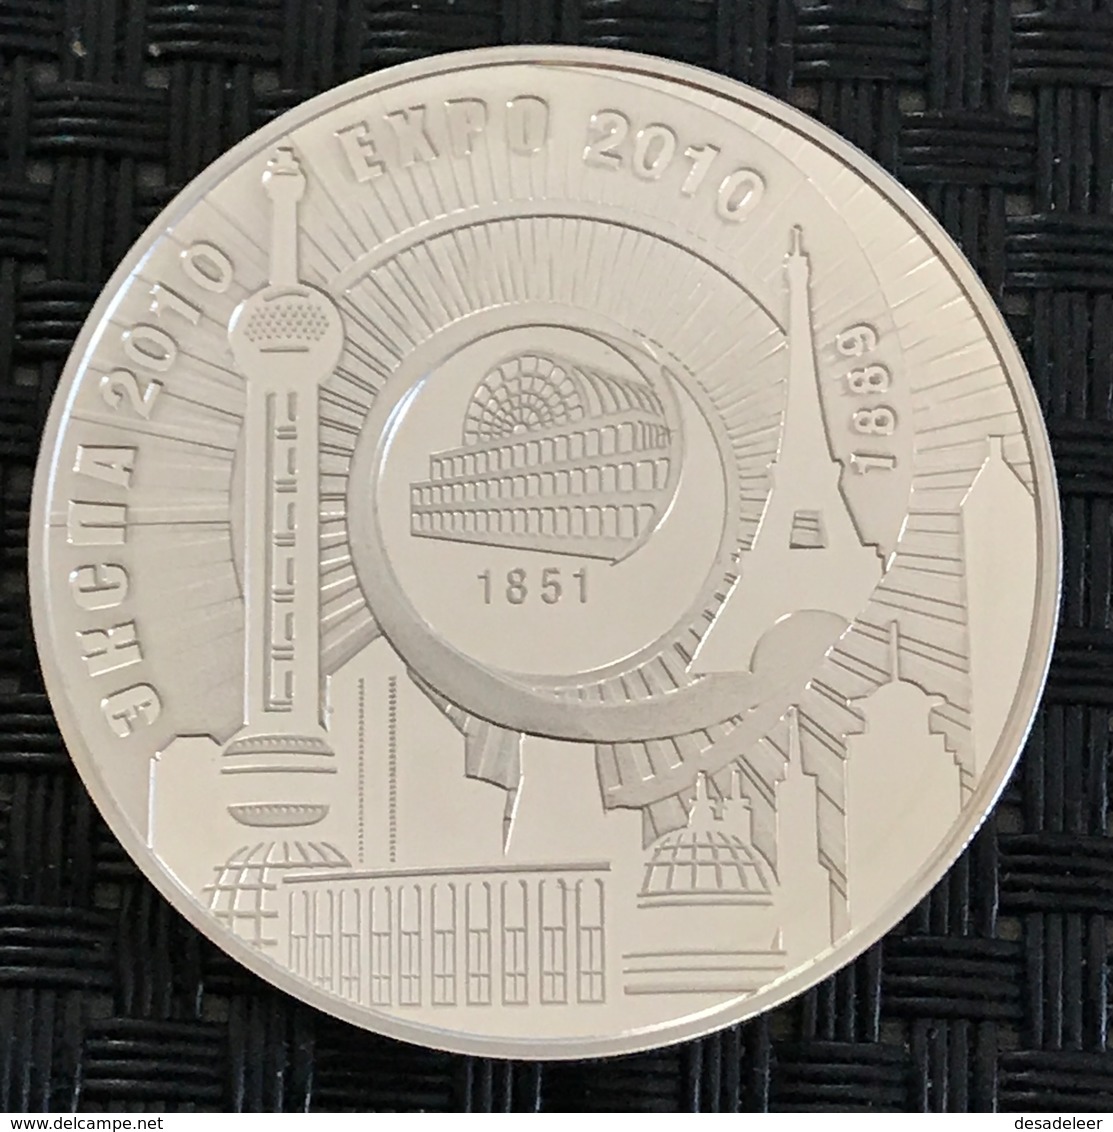 Belarus - 20 Ruble 2010 - Expo 2010 In Shanghai(China) - Silver - Wit-Rusland